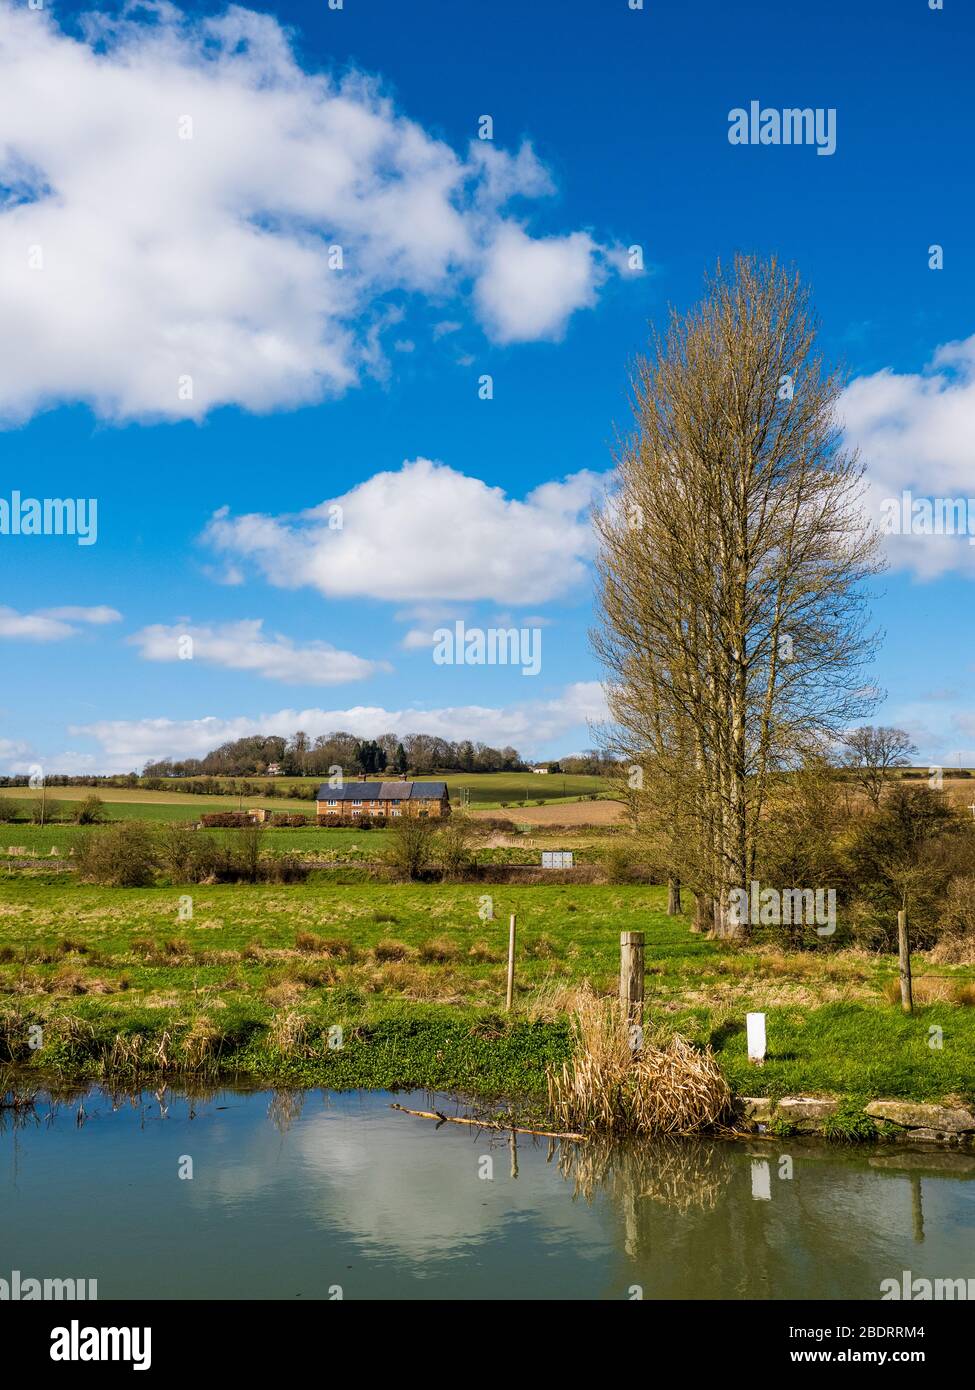 North Wessex Downs Landscape, Great Bedwyn, Wiltshire, Angleterre, Royaume-Uni, GB. Banque D'Images